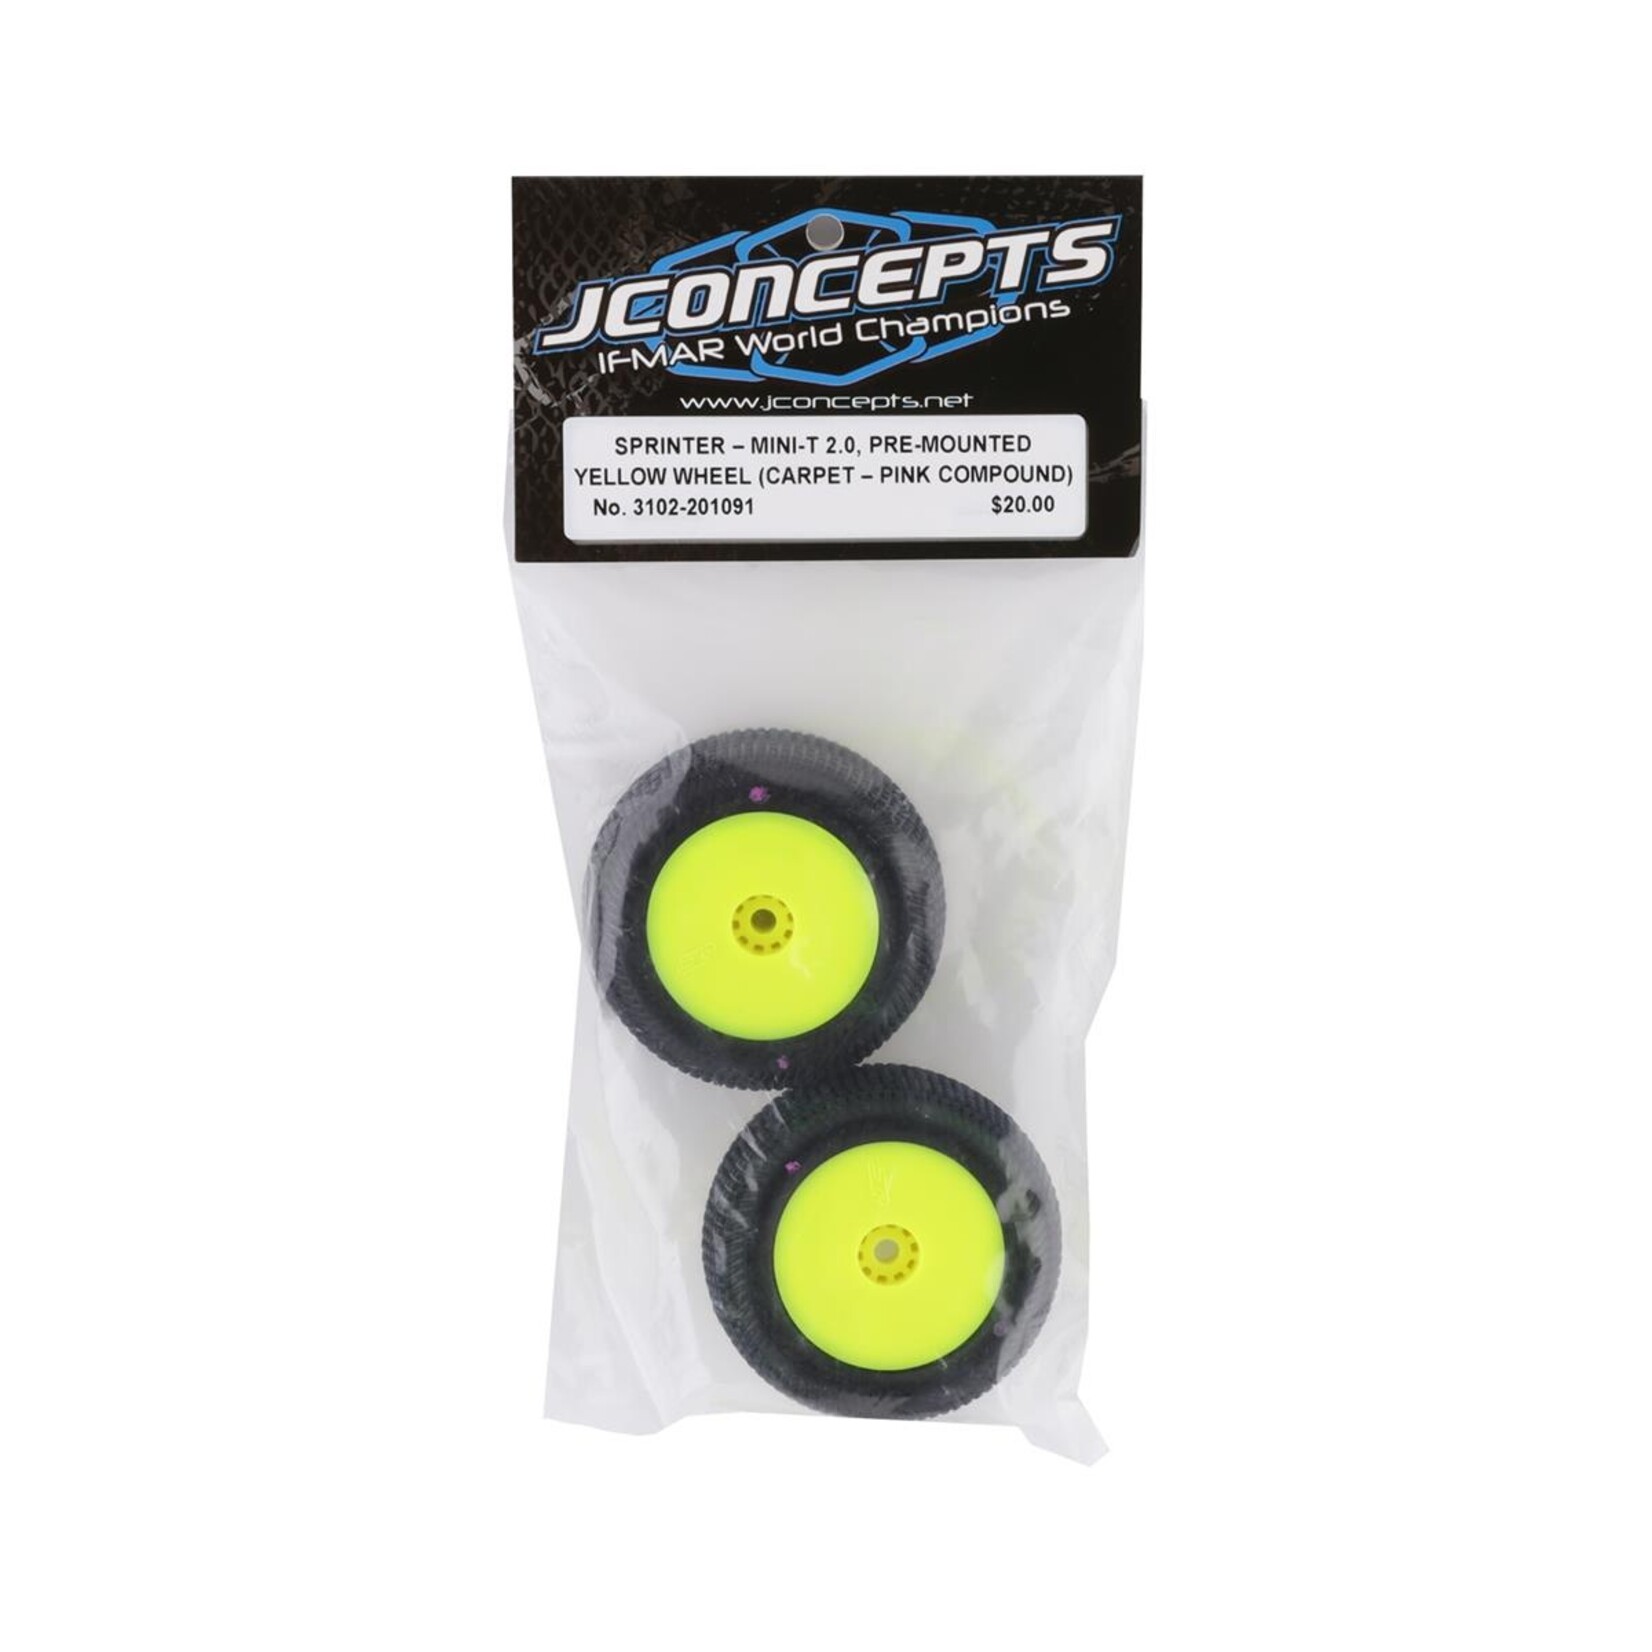 JConcepts JConcepts Mini-T 2.0 Sprinter Pre-Mounted Rear Tires (Yellow) (2) (Pink) #3102-201091